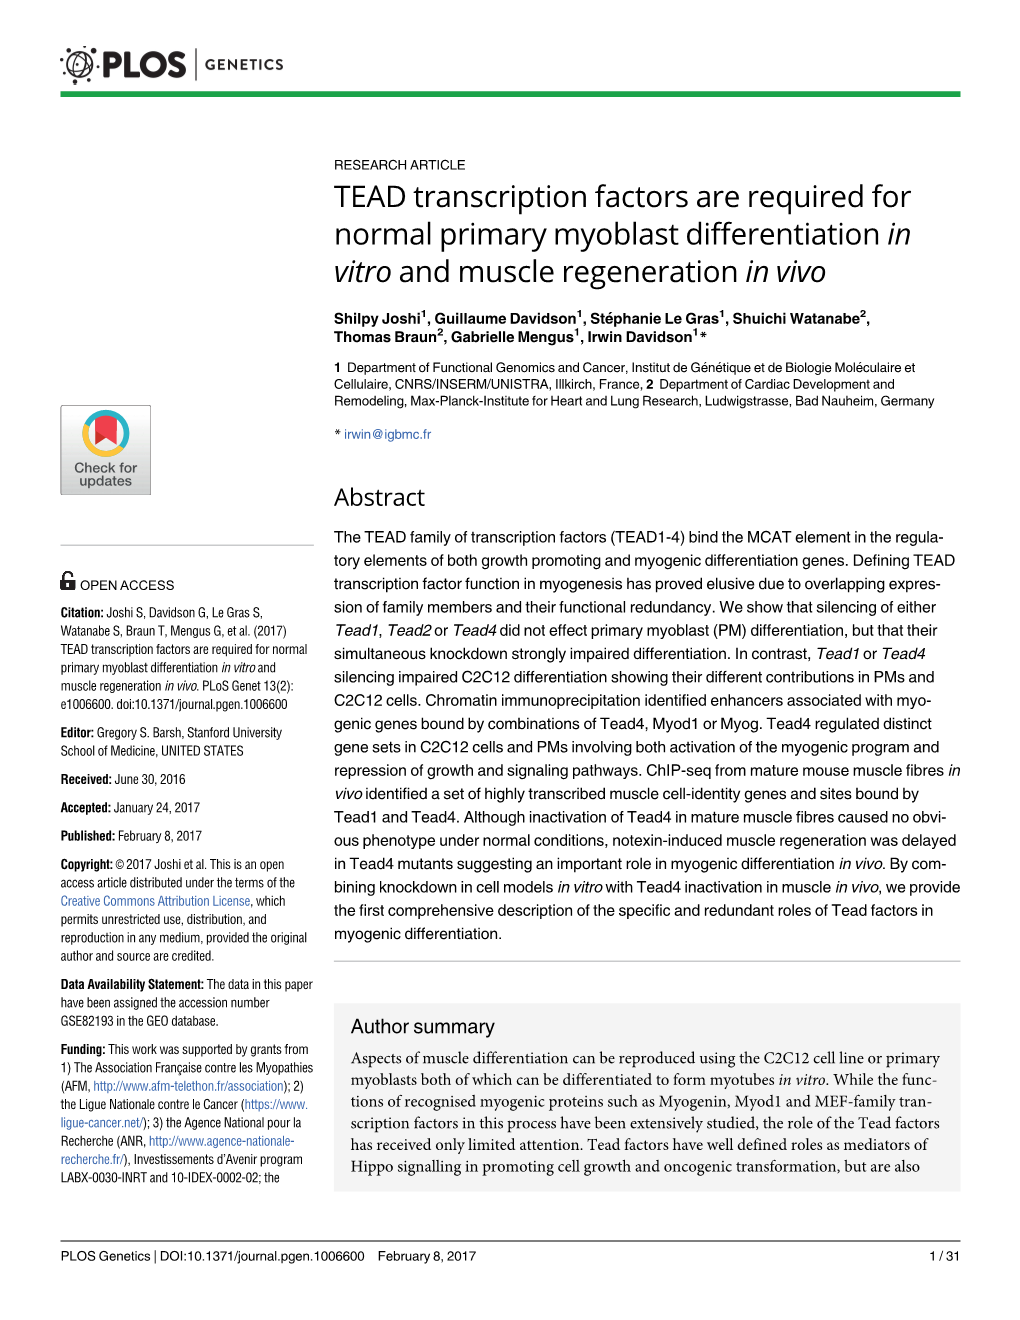 TEAD Transcription Factors Are Required for Normal Primary Myoblast Differentiation in Vitro and Muscle Regeneration in Vivo